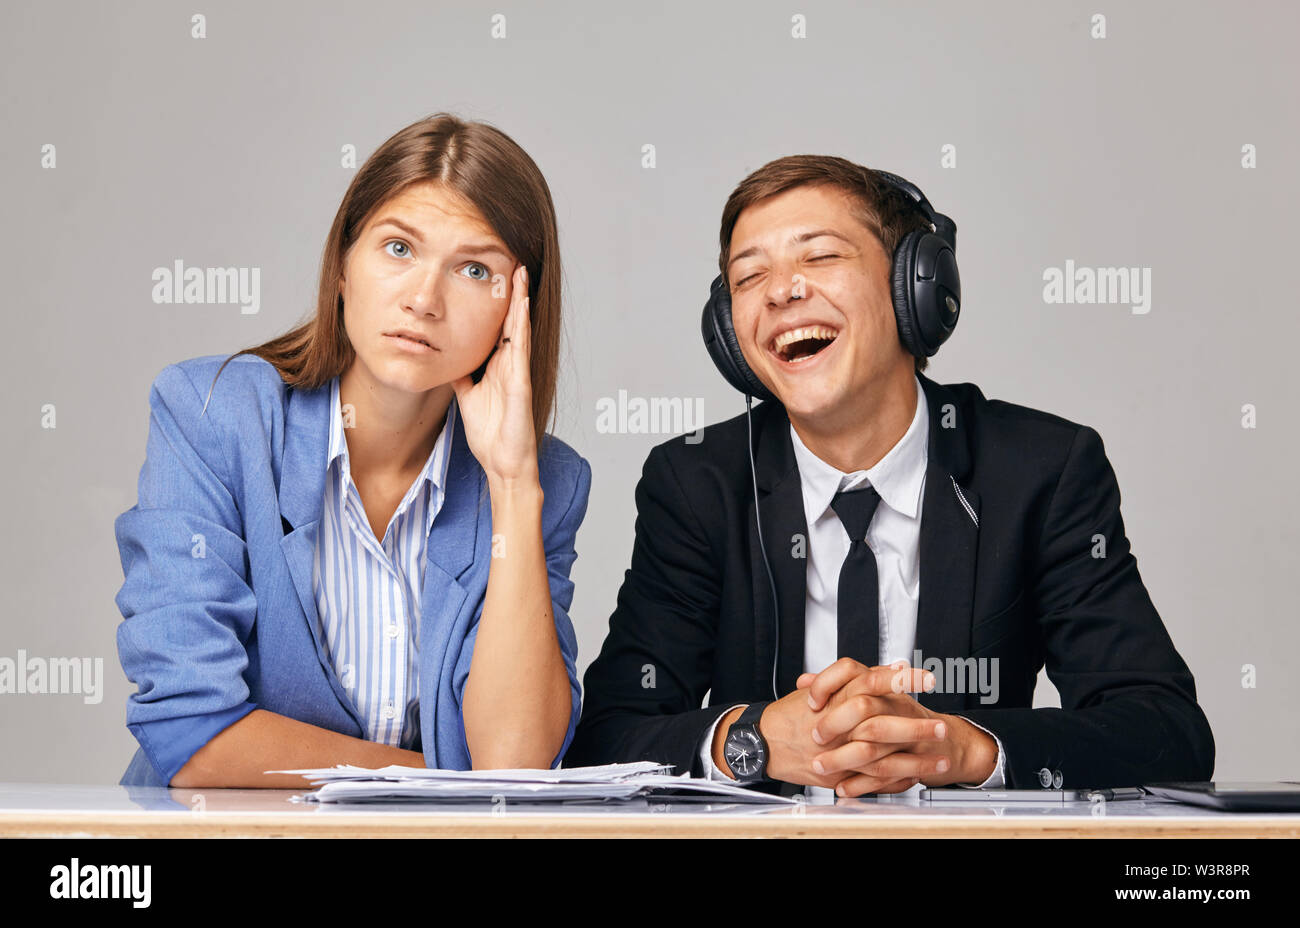 concept about problems at work. About when business partners do not hear each other Stock Photo